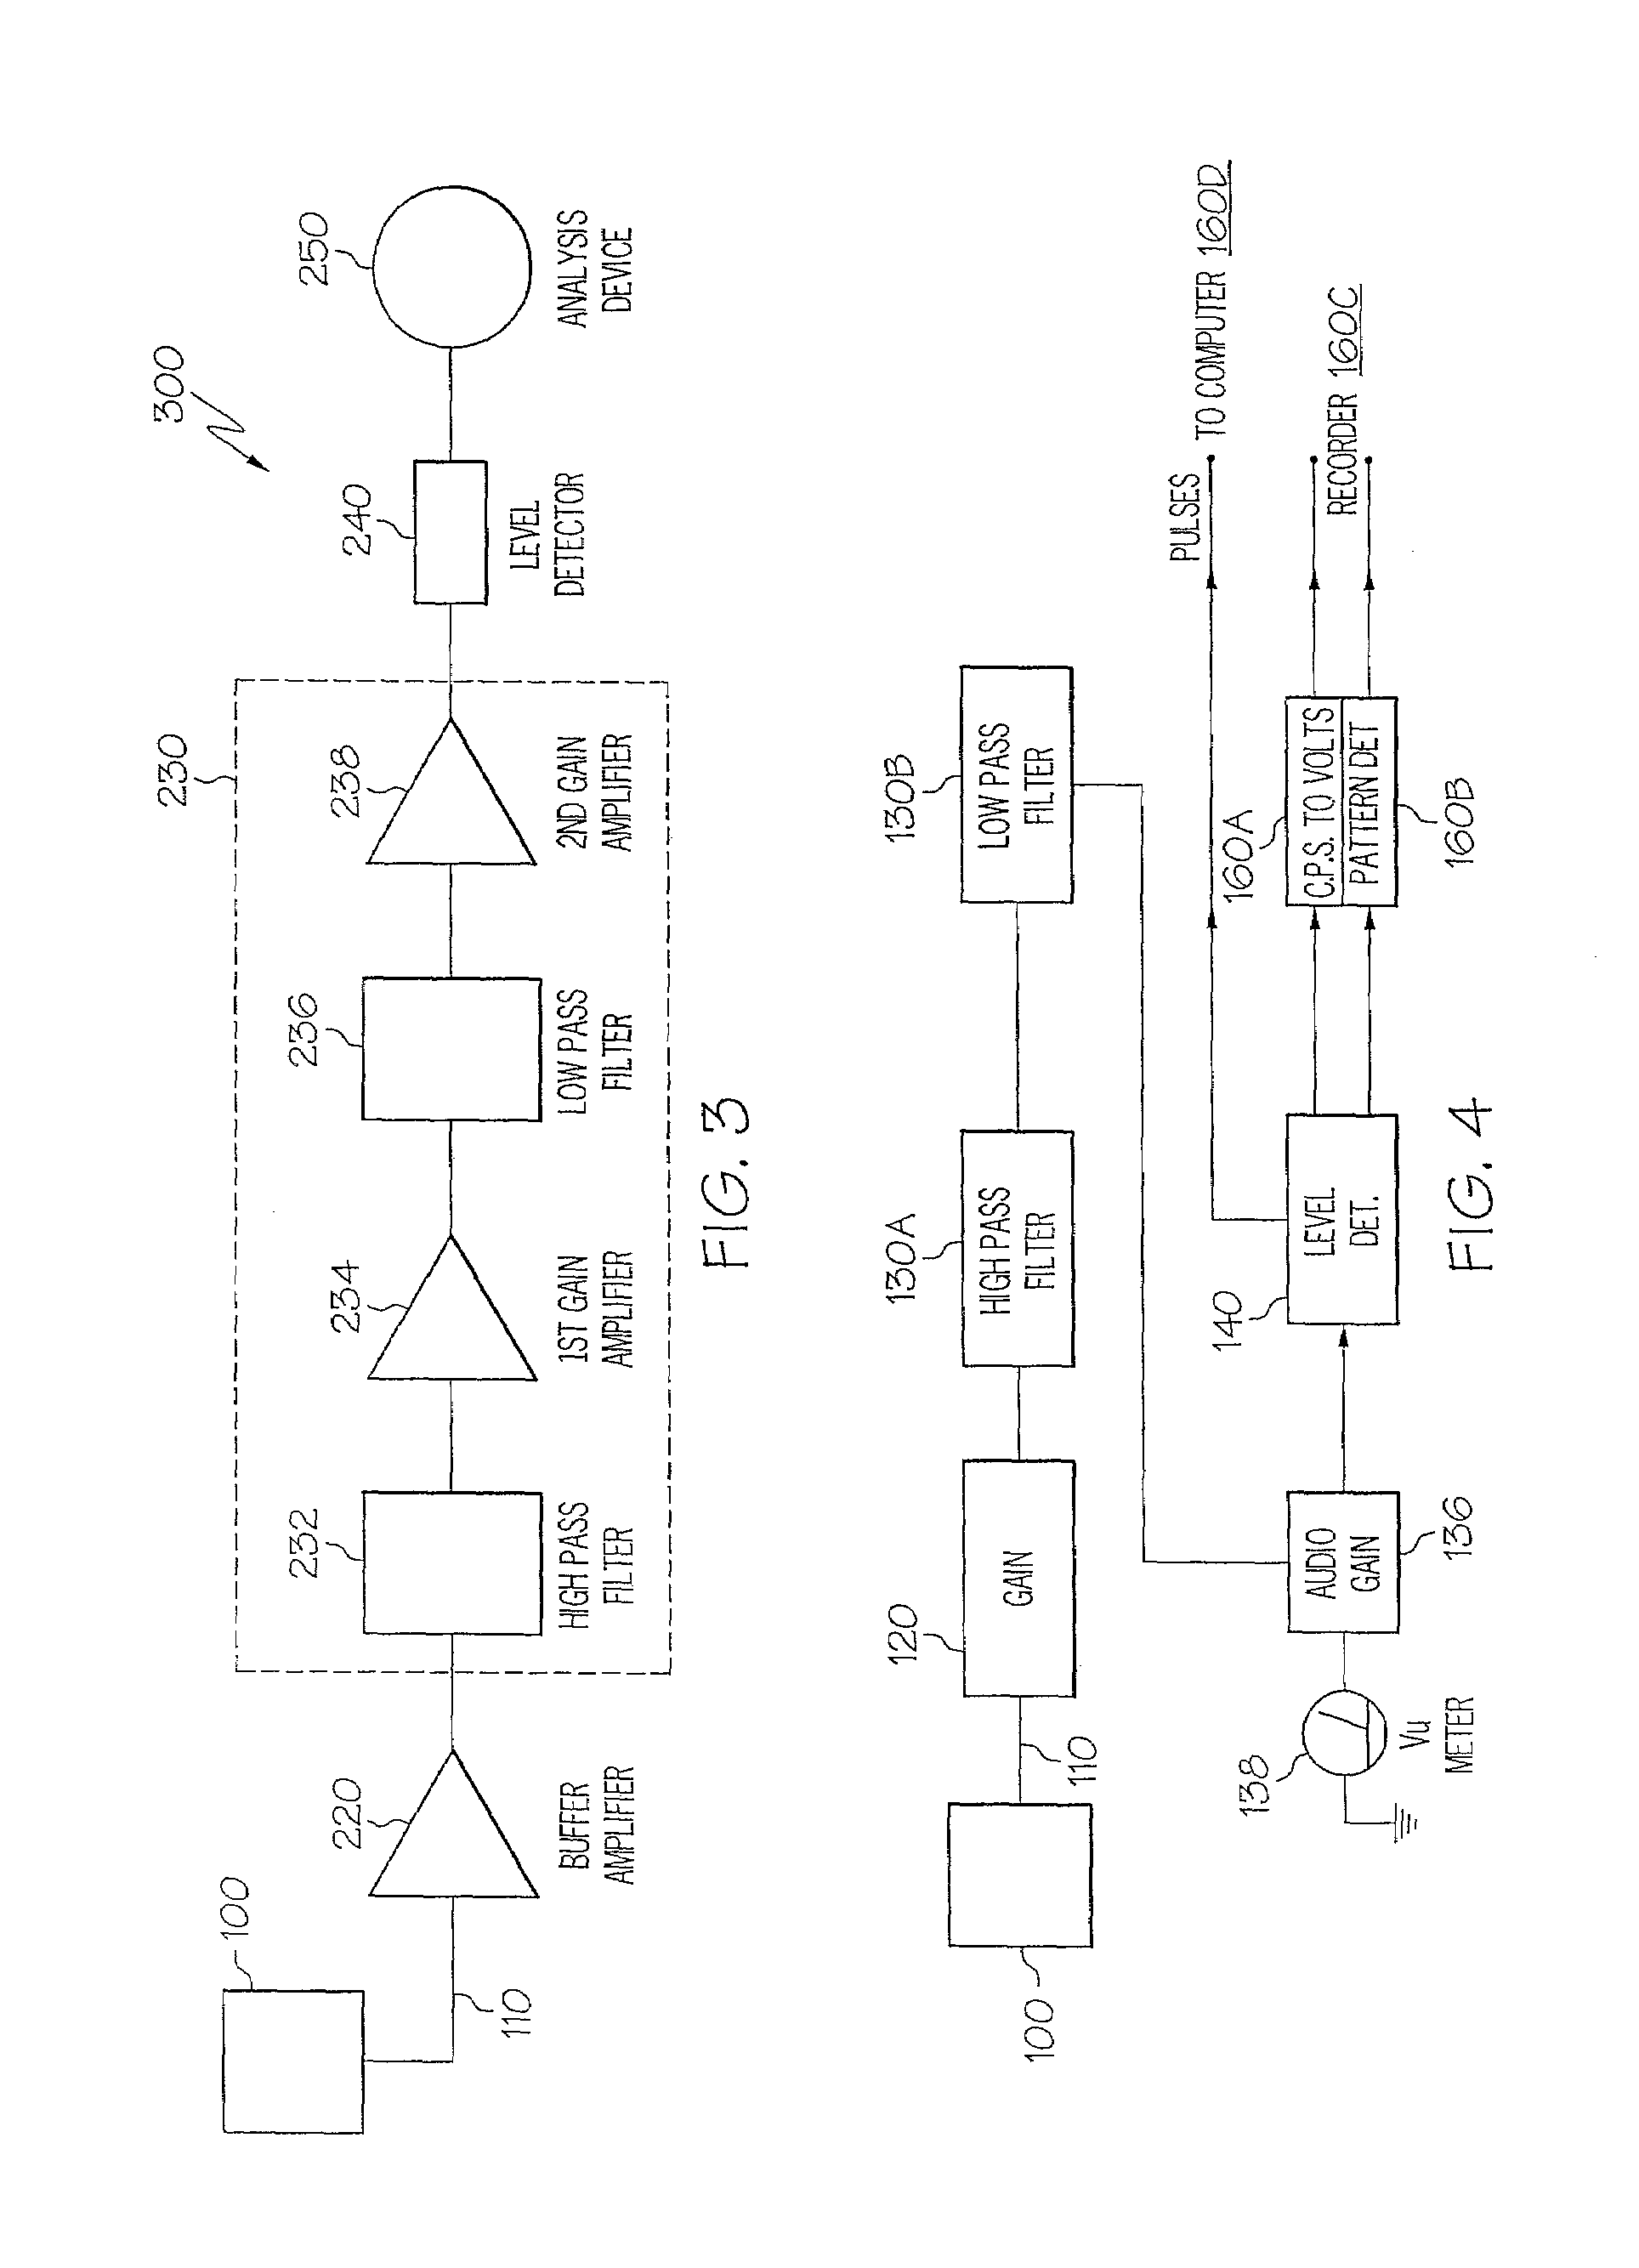 Electromagnetic impulse survey apparatus and method utilizing a magnetic component electromagnetic antenna